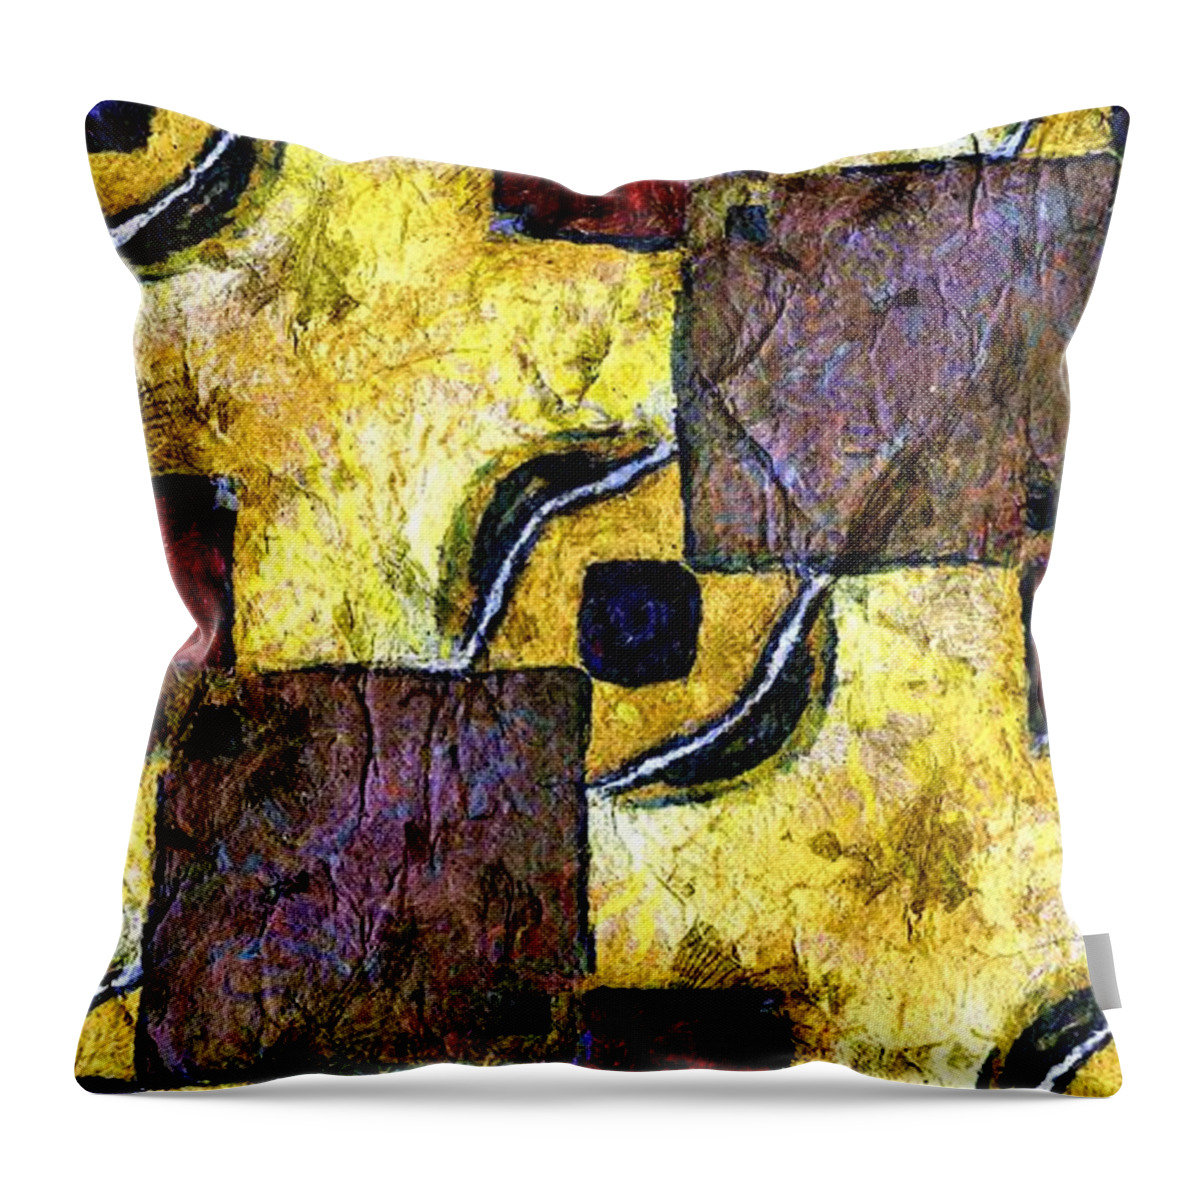 Abstract Throw Pillow featuring the painting Camera Obscura by RC DeWinter